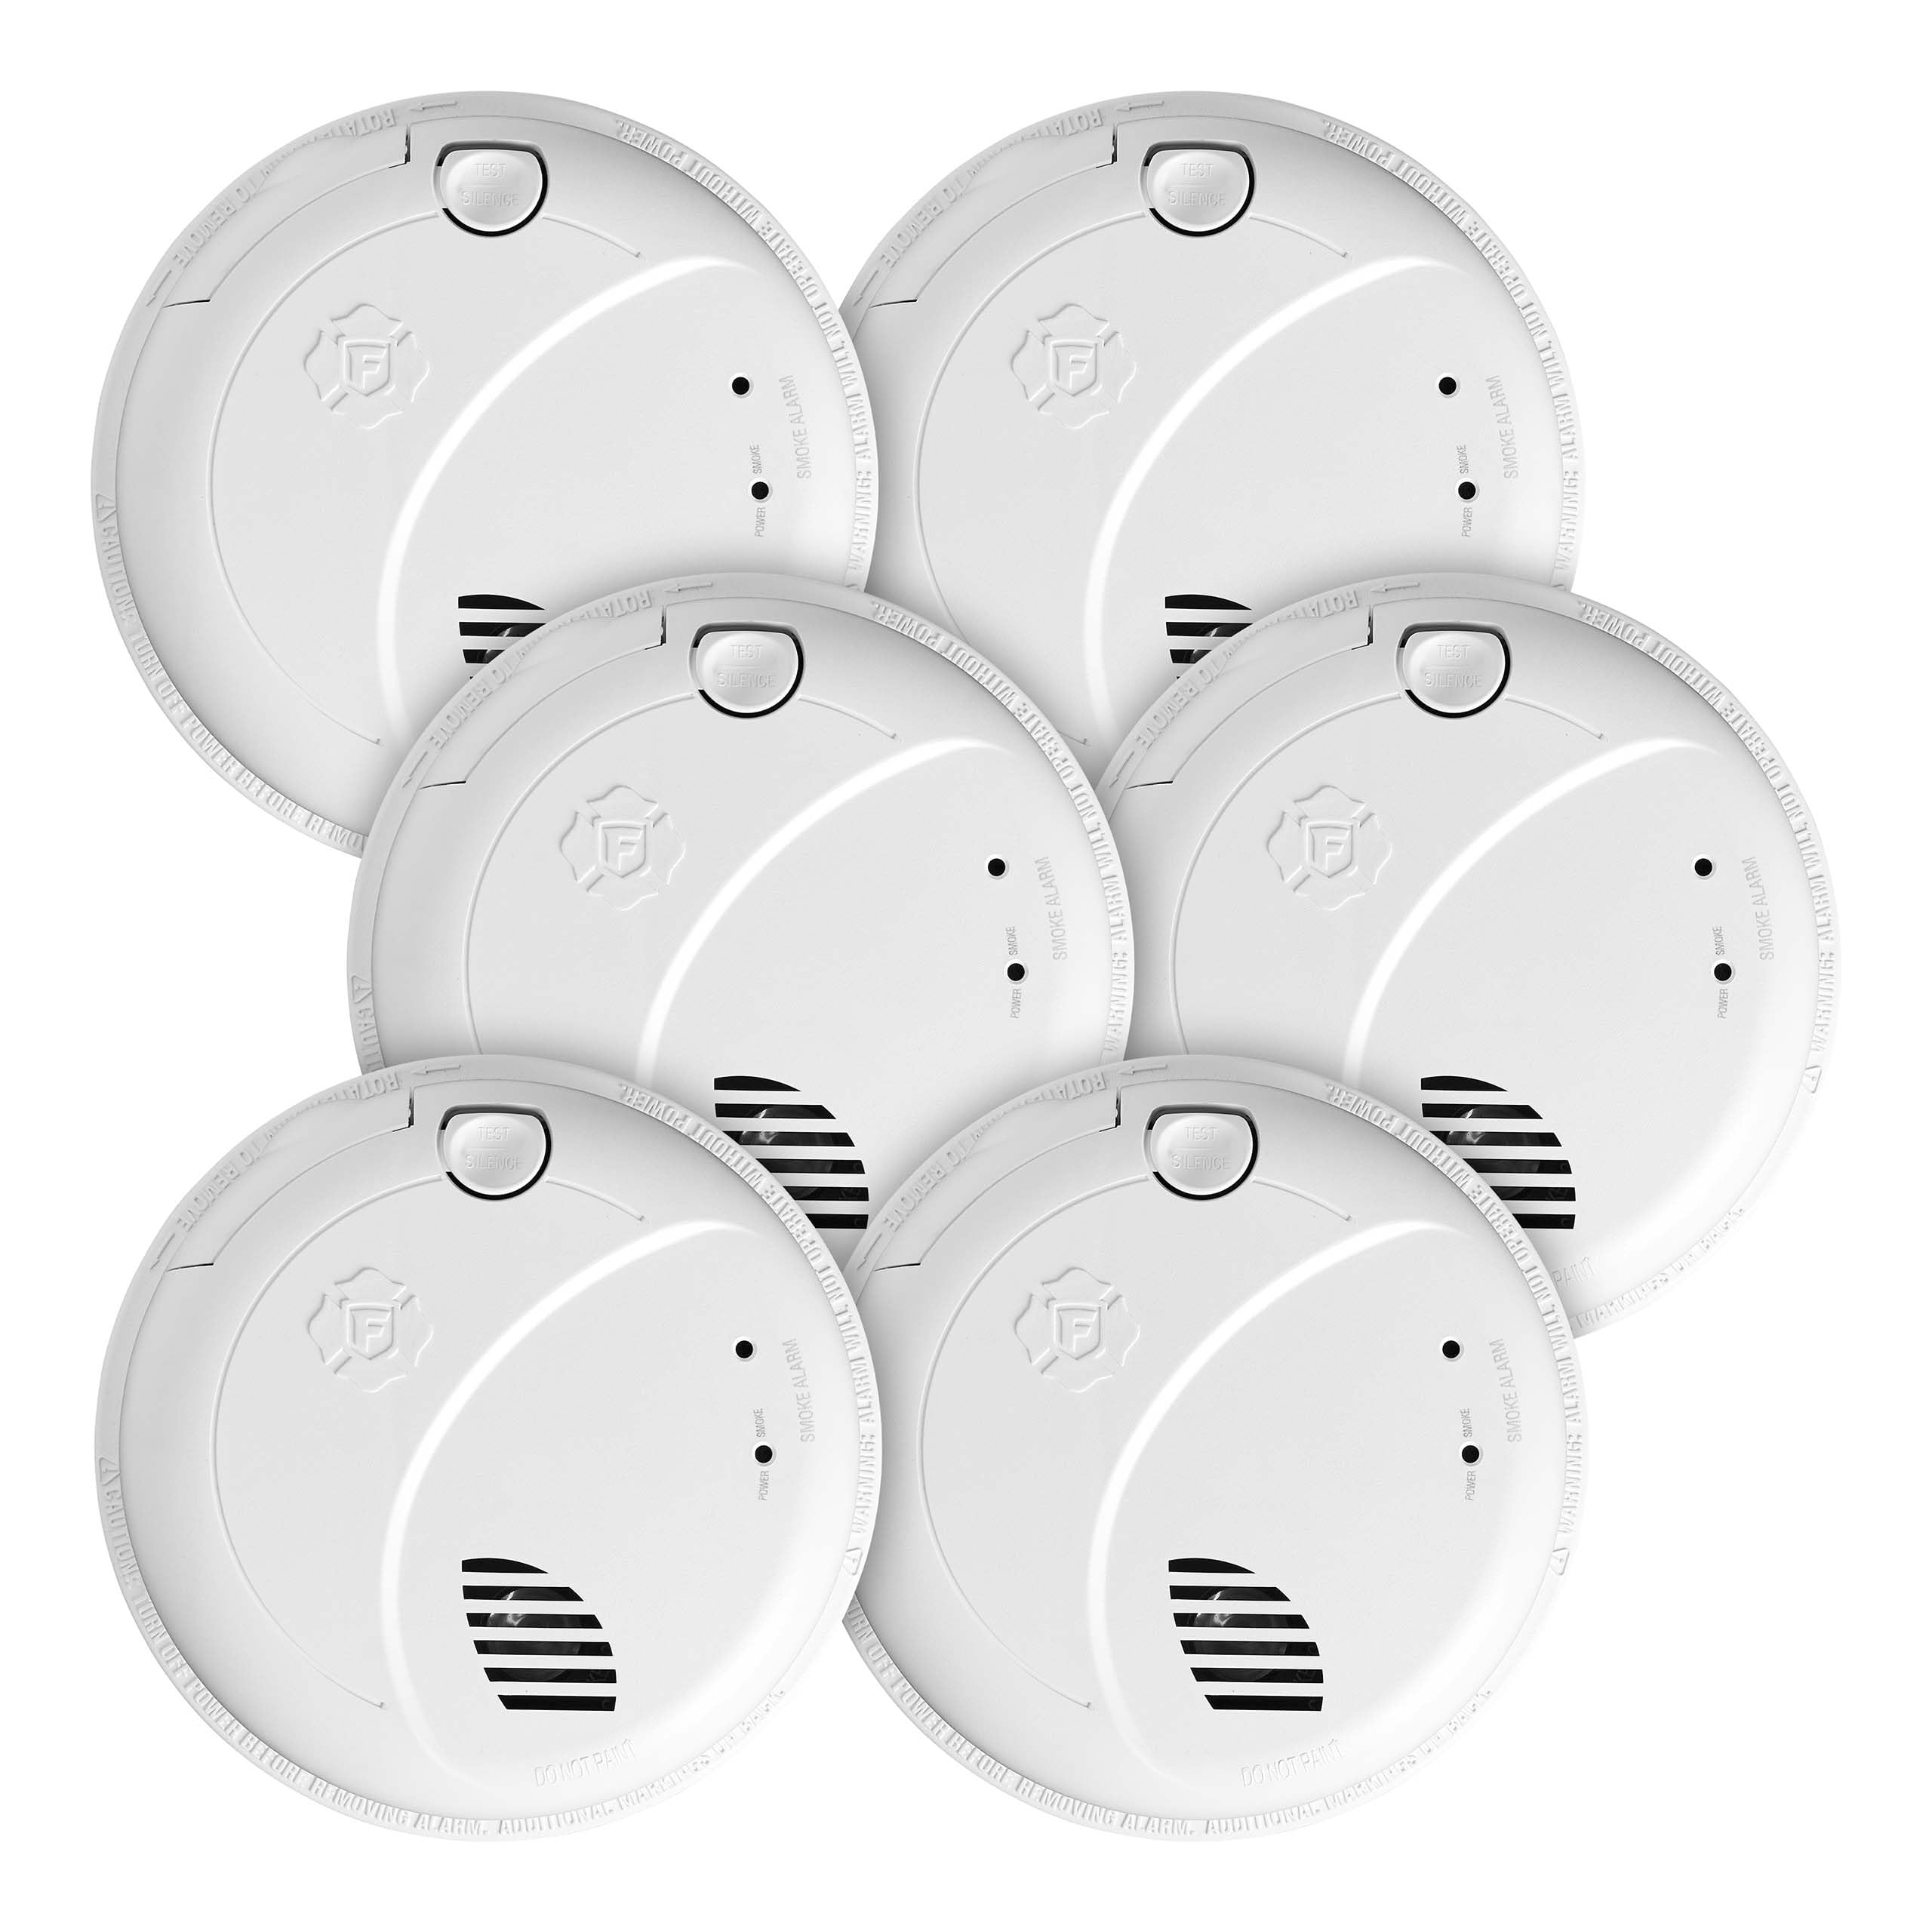 First Alert BRK SMI100-AC, Hardwire Interconnect Smoke Alarm with Battery Backup, 6-Pack